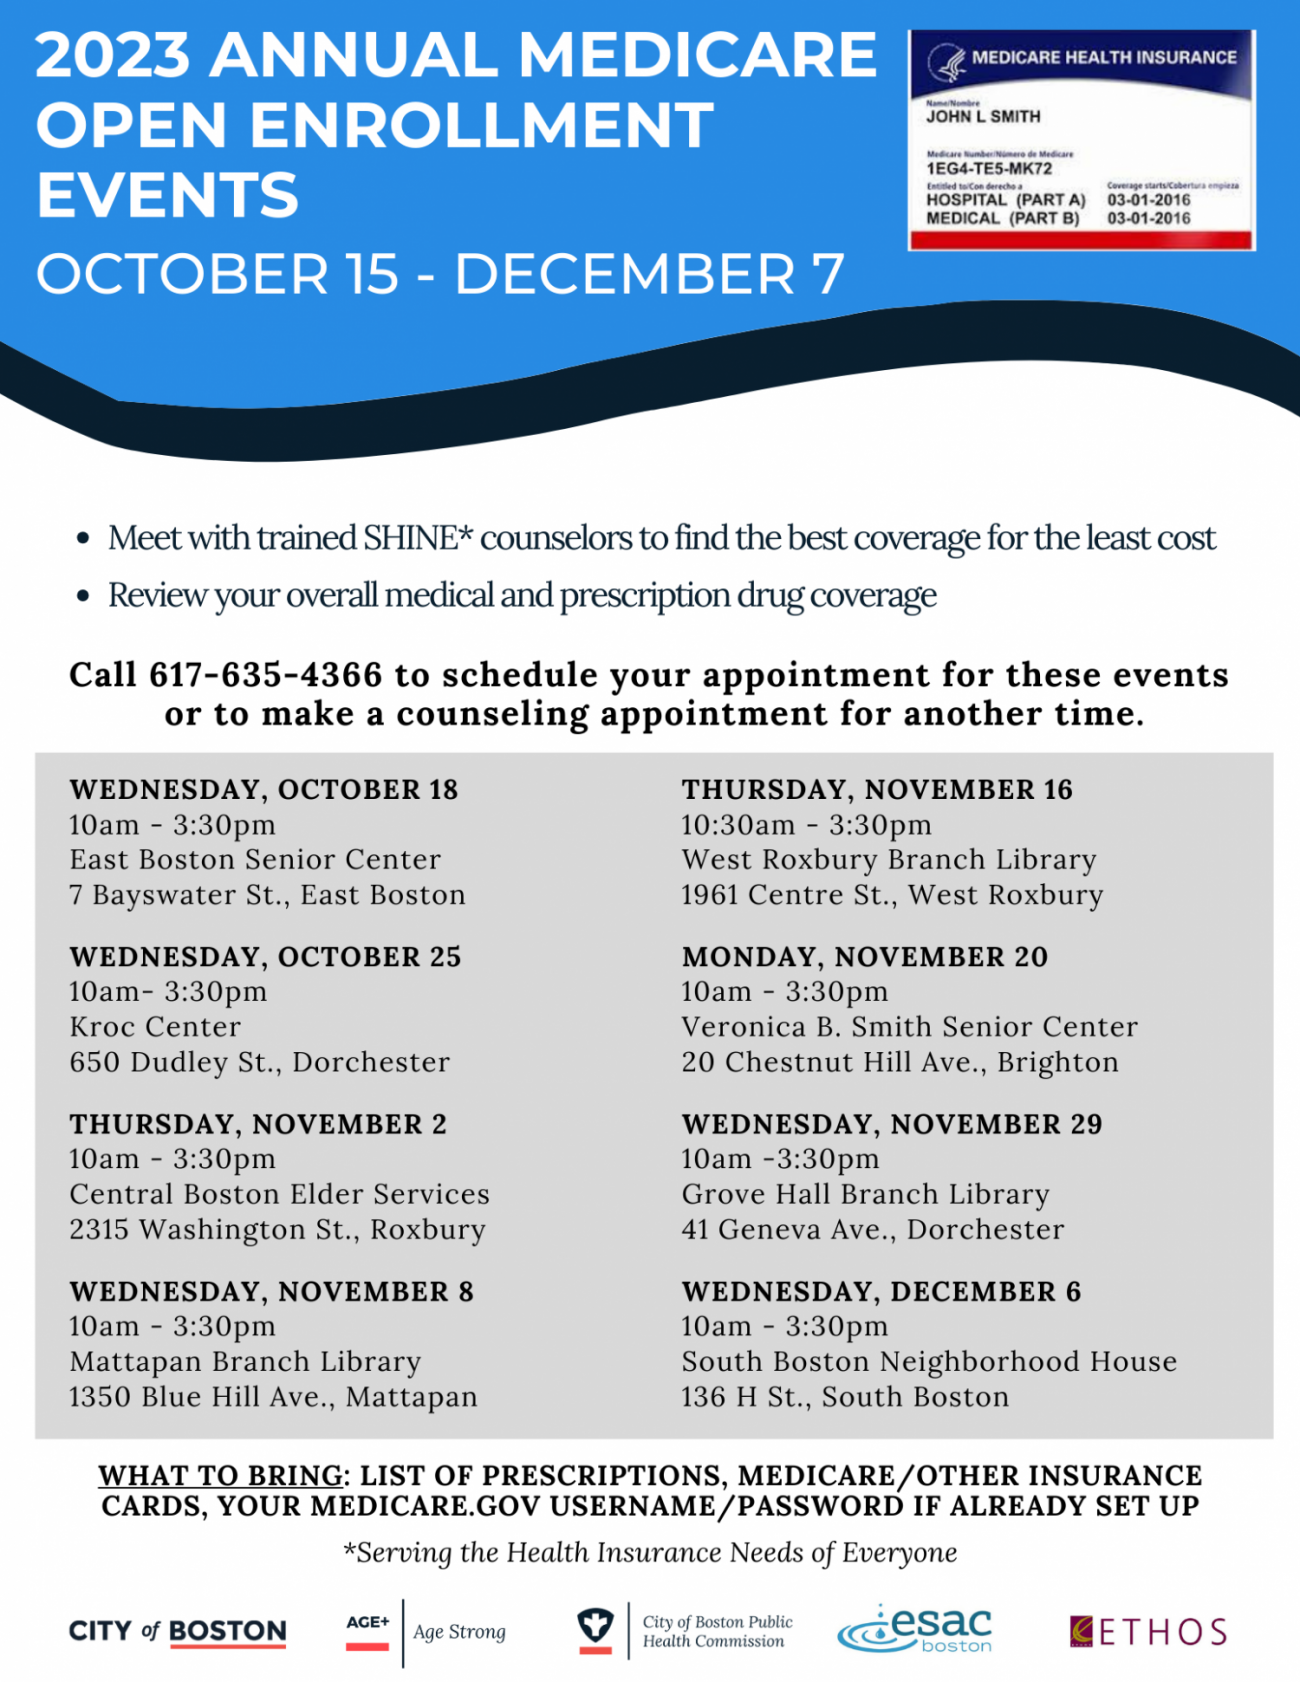 A flyer with a light blue wave strip at the top and plain white at the bottom for the background. The titled text reads, “2023 ANNUAL MEDICARE OPEN ENROLLMENT EVENTS OCTOBER 15 - DECEMBER 7” (The information below it says,) Meet with trained SHINE* counselors to find the best coverage for the least cost • Review your overall medical and prescription drug coverage Call 617-635-4366 to schedule your appointment for these events or to make a counseling appointment for another time. WEDNESDAY, OCTOBER 18 10am - 3:30pm East Boston Senior Center 7 Bayswater St., East Boston THURSDAY, NOVEMBER 16 10:30am - 3:30pm West Roxbury Branch Library 1961 Centre St., West Roxbury WEDNESDAY, OCTOBER 25 10am- 3:30pm Kroc Center 650 Dudley St., Dorchester MONDAY, NOVEMBER 20 10am - 3:30pm Veronica B. Smith Senior Center 20 Chestnut Hill Ave., Brighton THURSDAY, NOVEMBER 2 10am - 3:30pm Central Boston Elder Services 2315 Washington St., Roxbury WEDNESDAY, NOVEMBER 29 10am -3:30pm Grove Hall Branch Library 41 Geneva Ave., Dorchester WEDNESDAY, NOVEMBER 8 10am - 3:30pm Mattapan Branch Library 1350 Blue Hill Ave., Mattapan WEDNESDAY, DECEMBER 6 10am - 3:30pm South Boston Neighborhood House 136 H St., South Boston WHAT TO BRING: LIST OF PRESCRIPTIONS, MEDICARE / OTHER INSURANCE CARDS, YOUR MEDICARE.GOV USERNAME/PASSWORD IF ALREADY SET UP *Serving the Health Insurance Needs of Everyone” Images/logos: (image) an example of a insurance card reads, “MEDICARE HEALTH INSURANCE JOHN I SmitH Medicare hunder/insero de Medicare 1EG4-TE5-MK72 Entitled to Con derecho a Coverage starts/Coderta HOSPITAL (PART A) 03-01-2016 MEDICAL (PART B) 03-01-2016” (logos for the following) CITY of BOSTON, City of Boston Public Health Commission, Esac Boston, ETHOS, Age+, Age Strong.